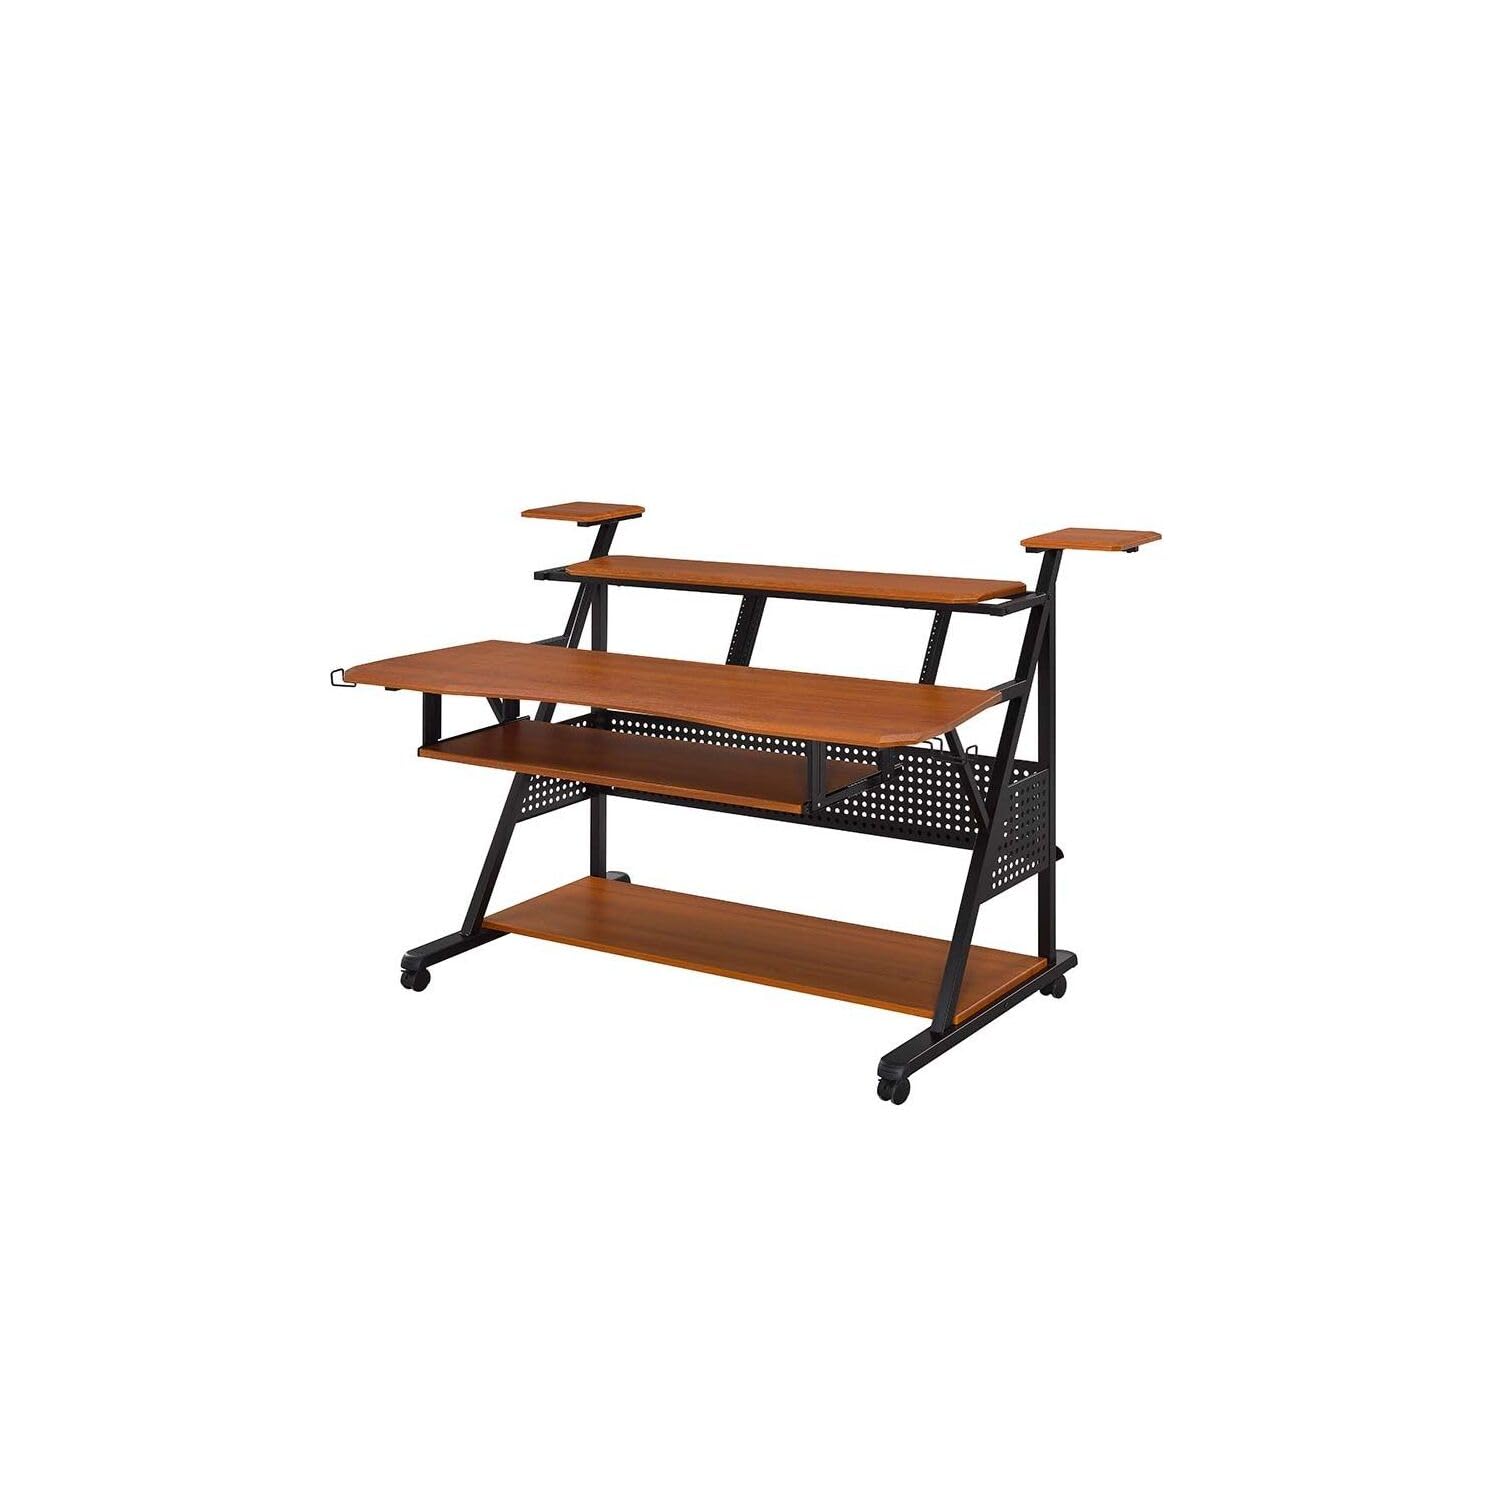 Acme Furniture Metal and Wooden Music Desk with Wheels, Cherry and Black